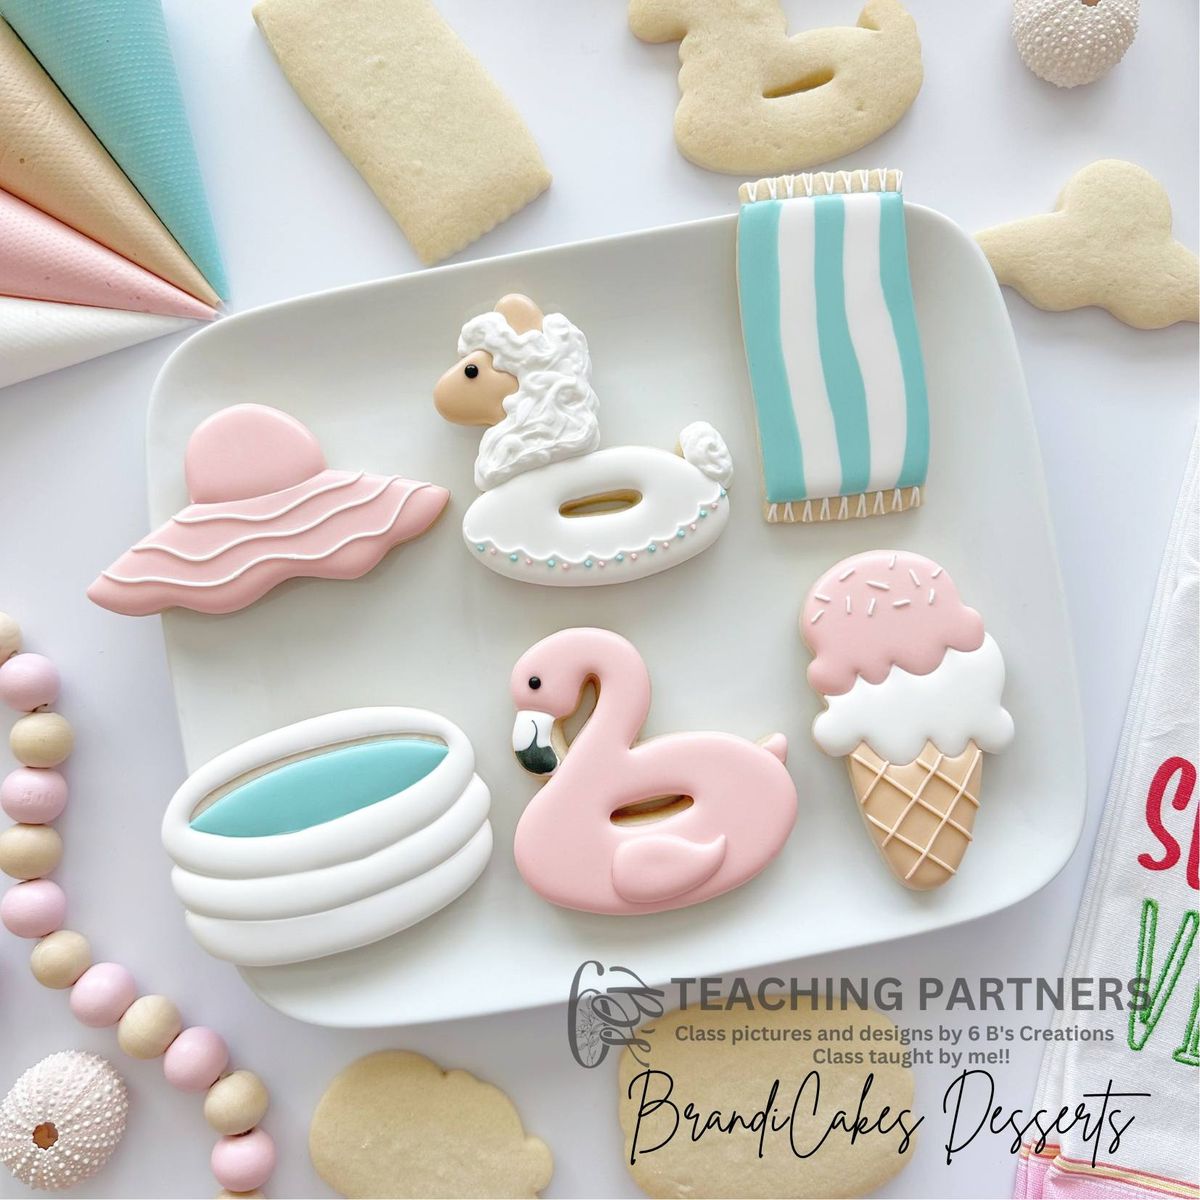 Poolside Fun Cookie Decorating Class